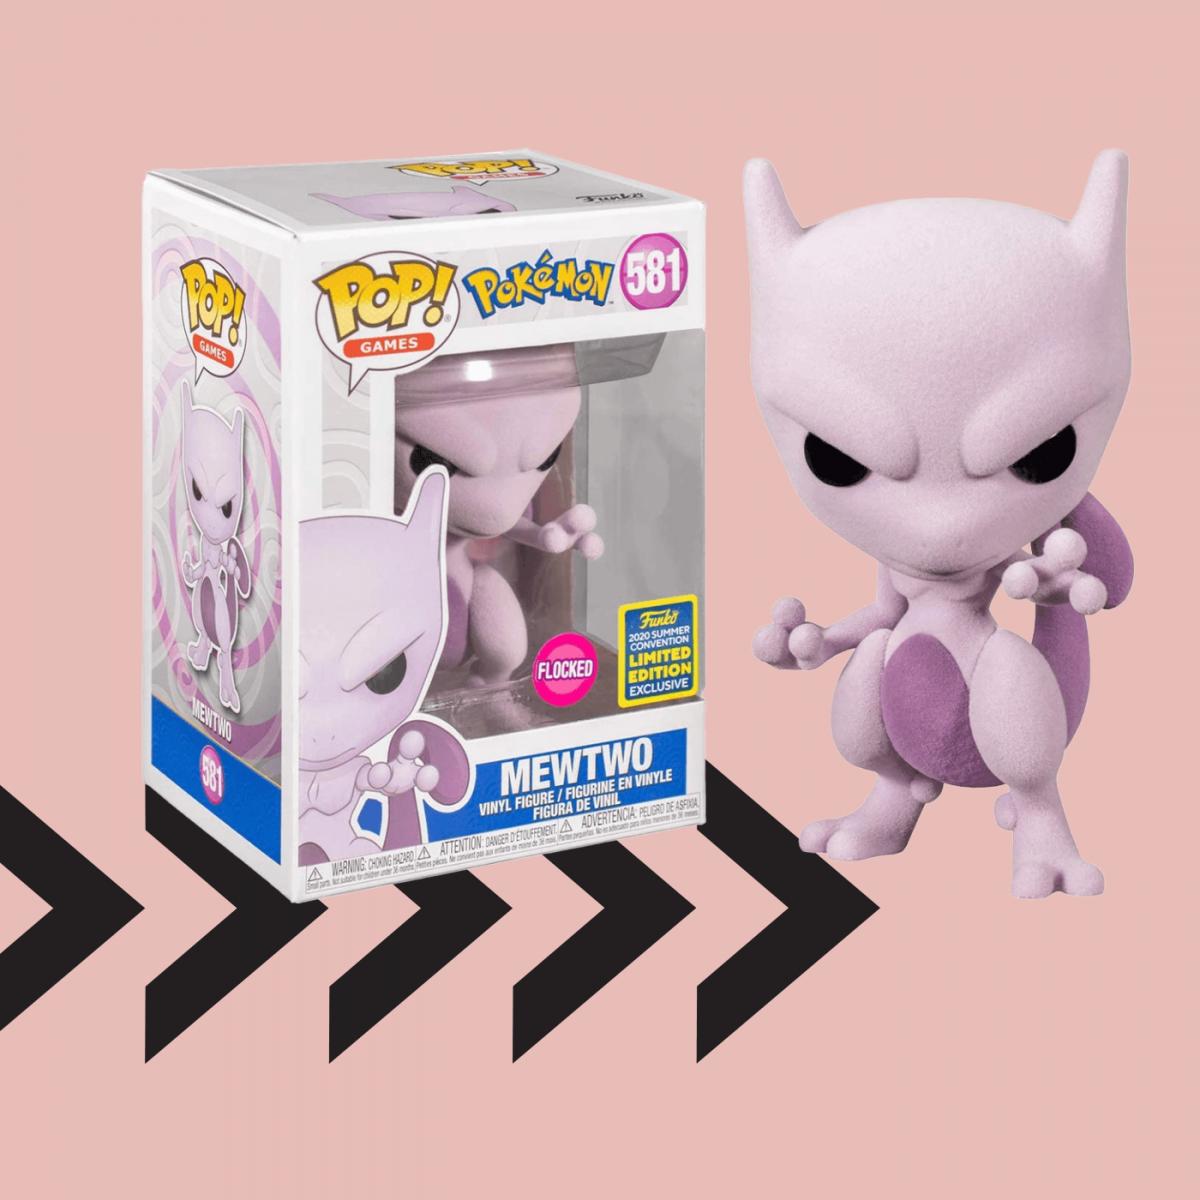 https://images-wp.stockx.com/news/wp-content/uploads/2021/05/Funko-Pop-Price-Guide_blog-hero-square-1200x1200.png